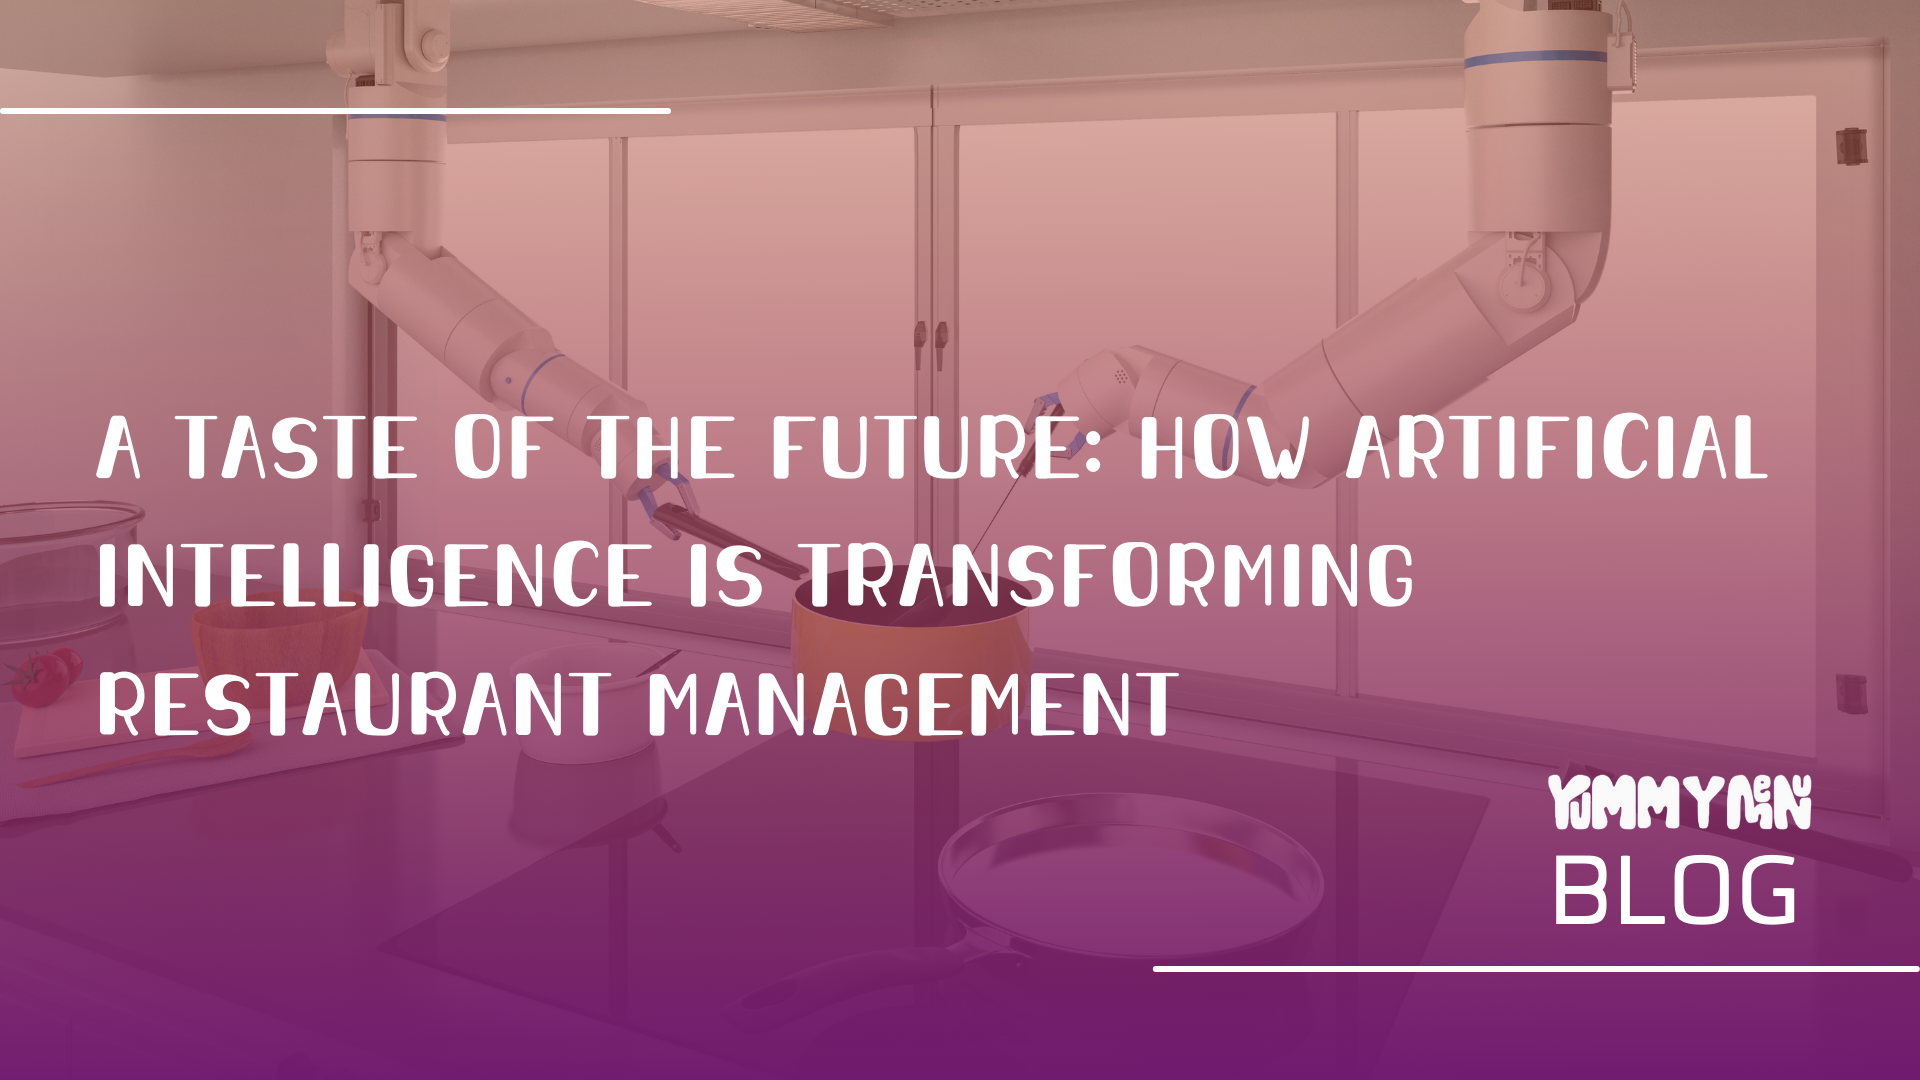 A Taste of the Future: How Artificial Intelligence Is Transforming Restaurant Management